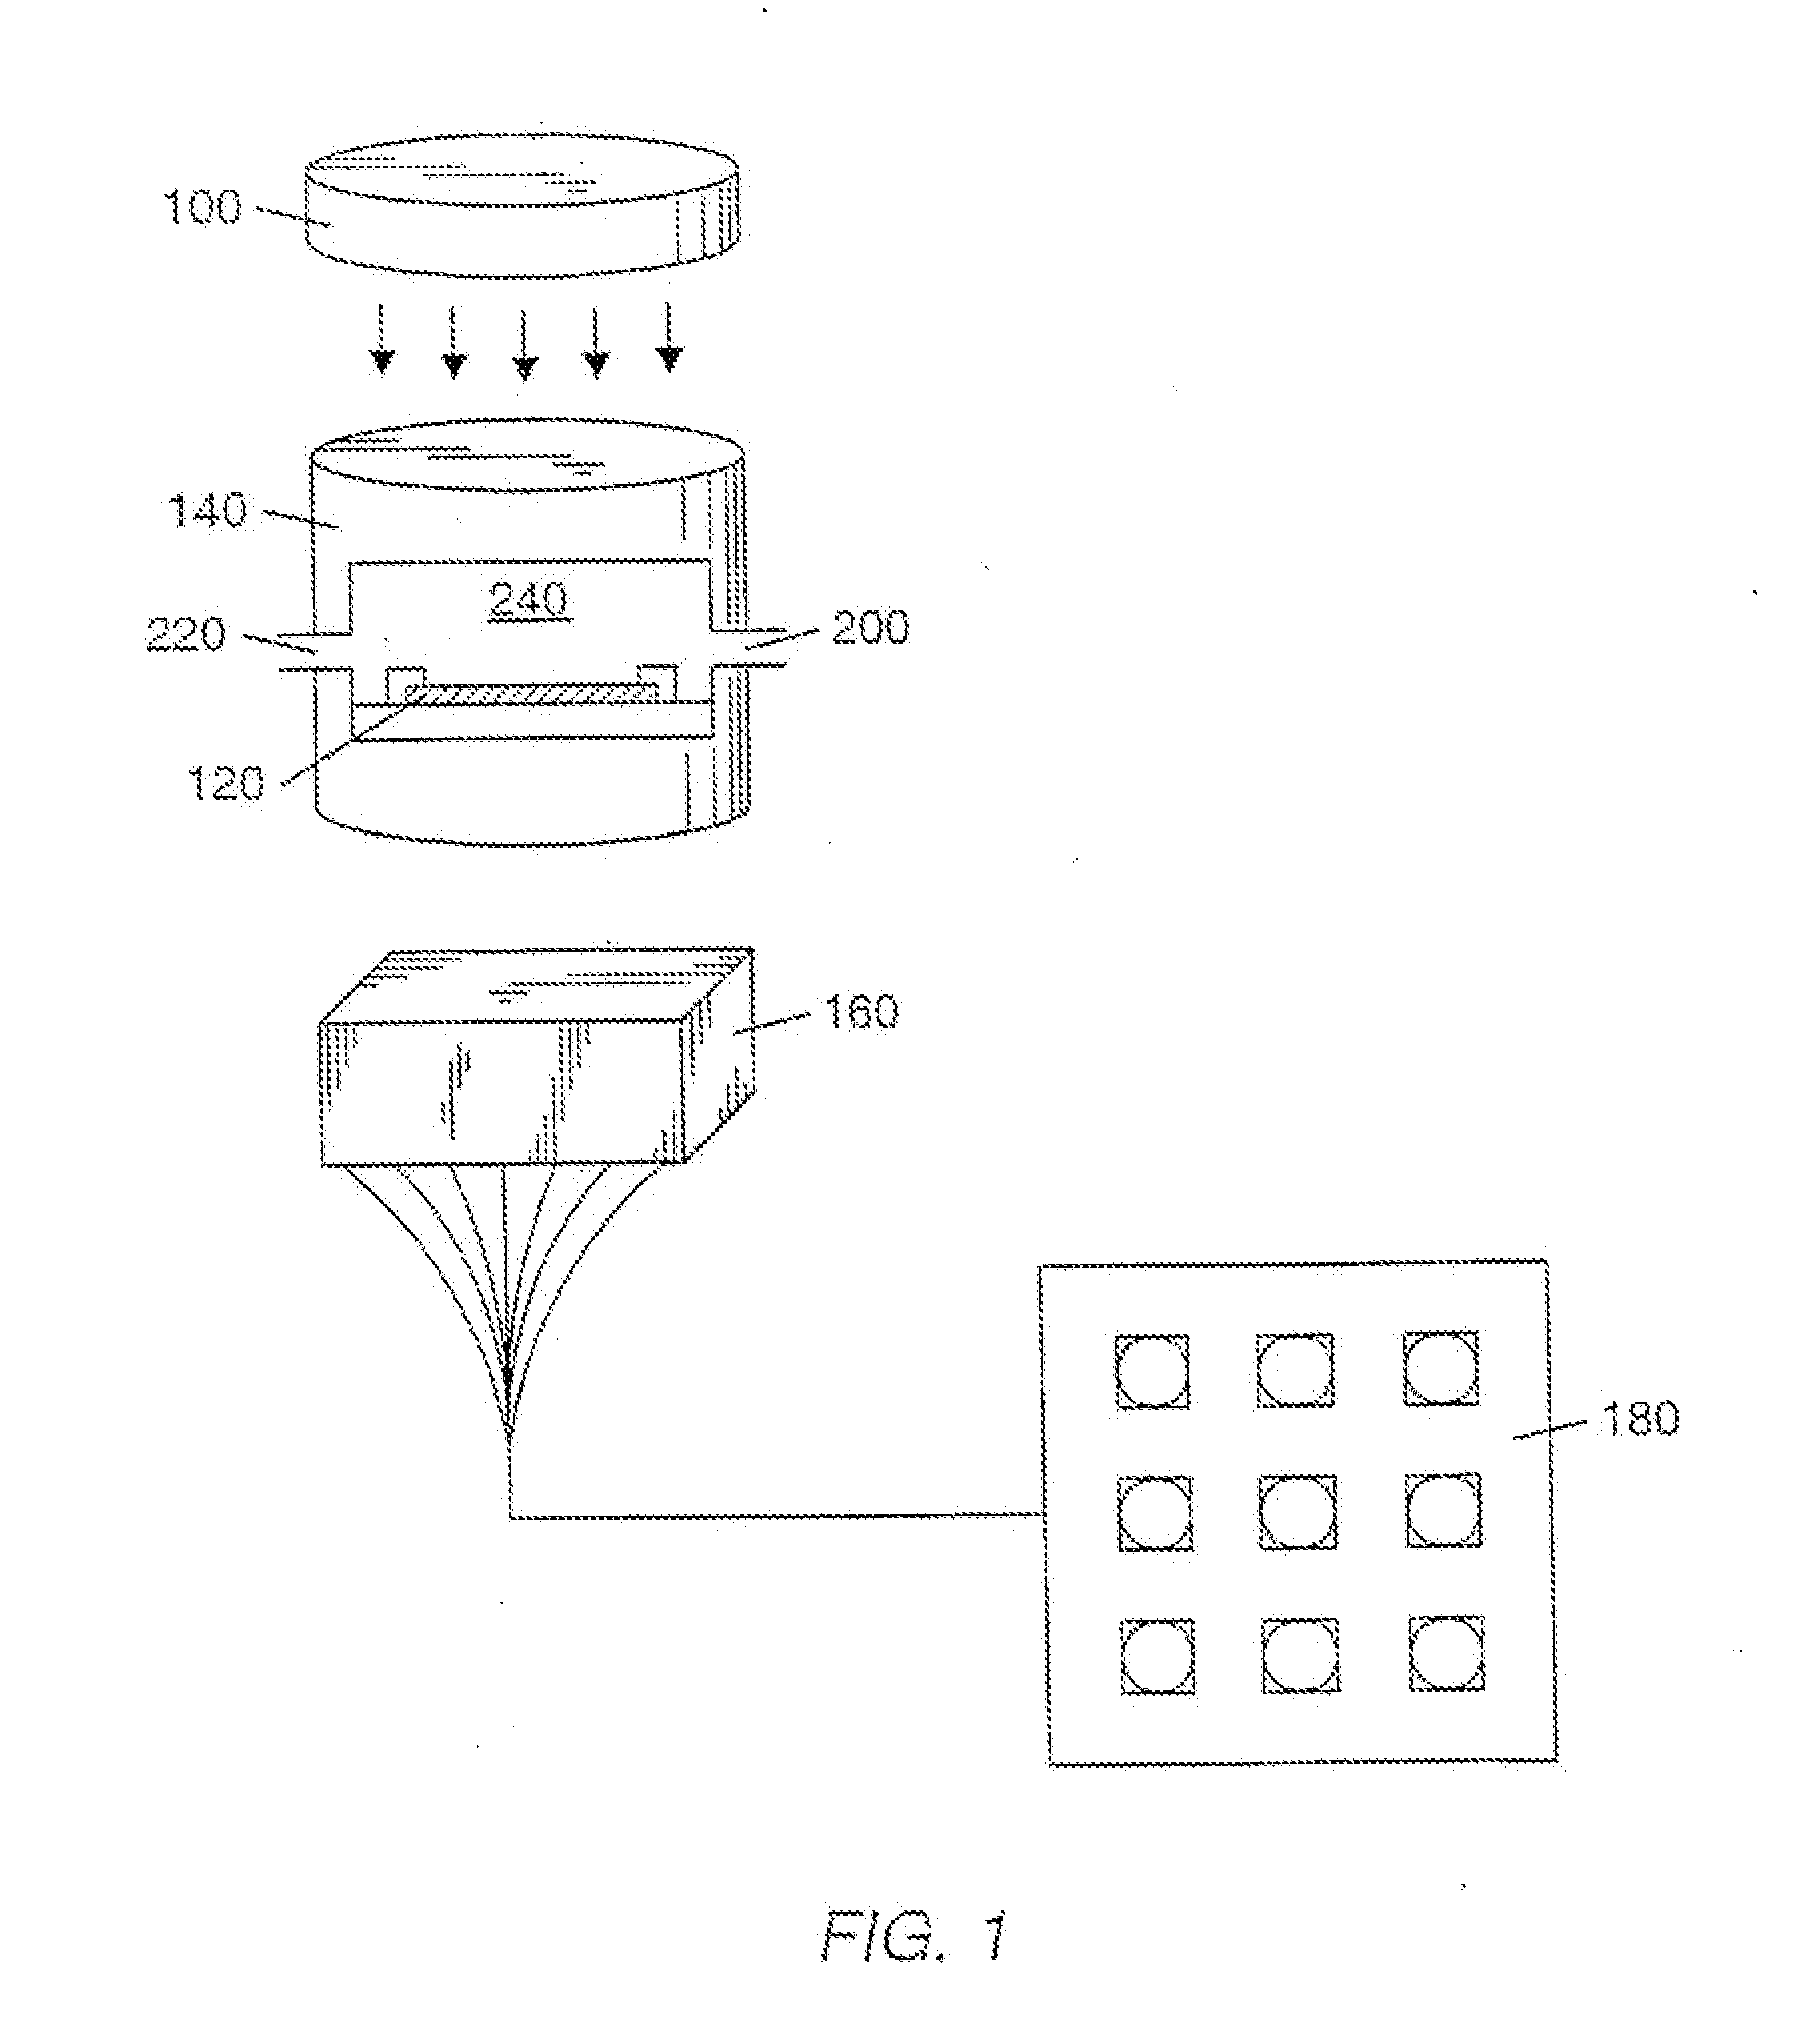 Multi-Shell Microspheres With Integrated Chromatographic And Detection Layers For Use In Array Sensors